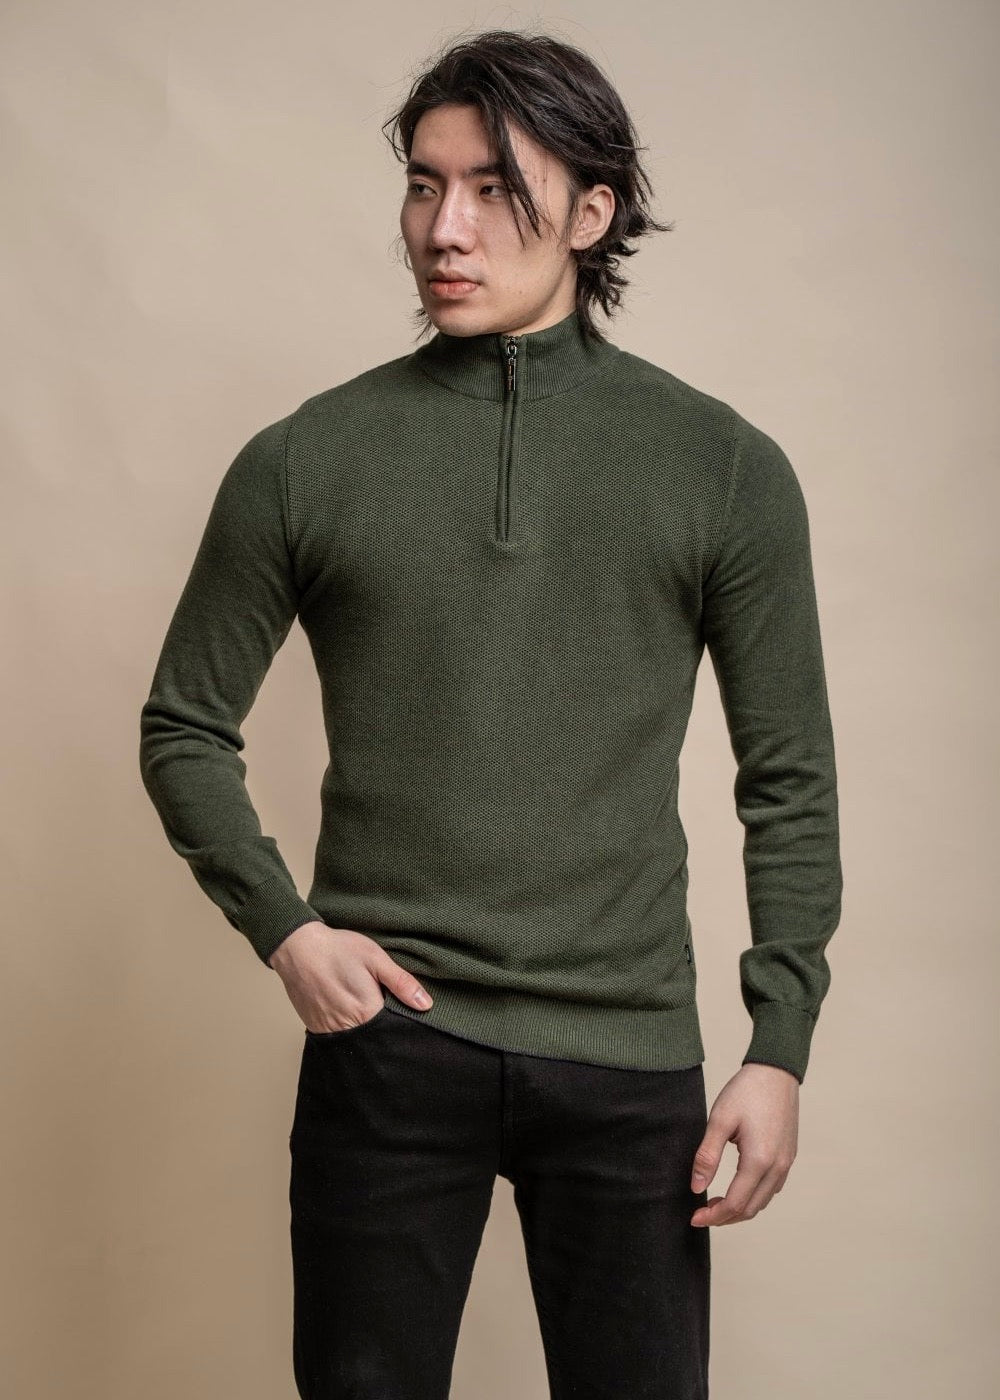 Forest colour knitted jumper for men with half-zip, showing front.